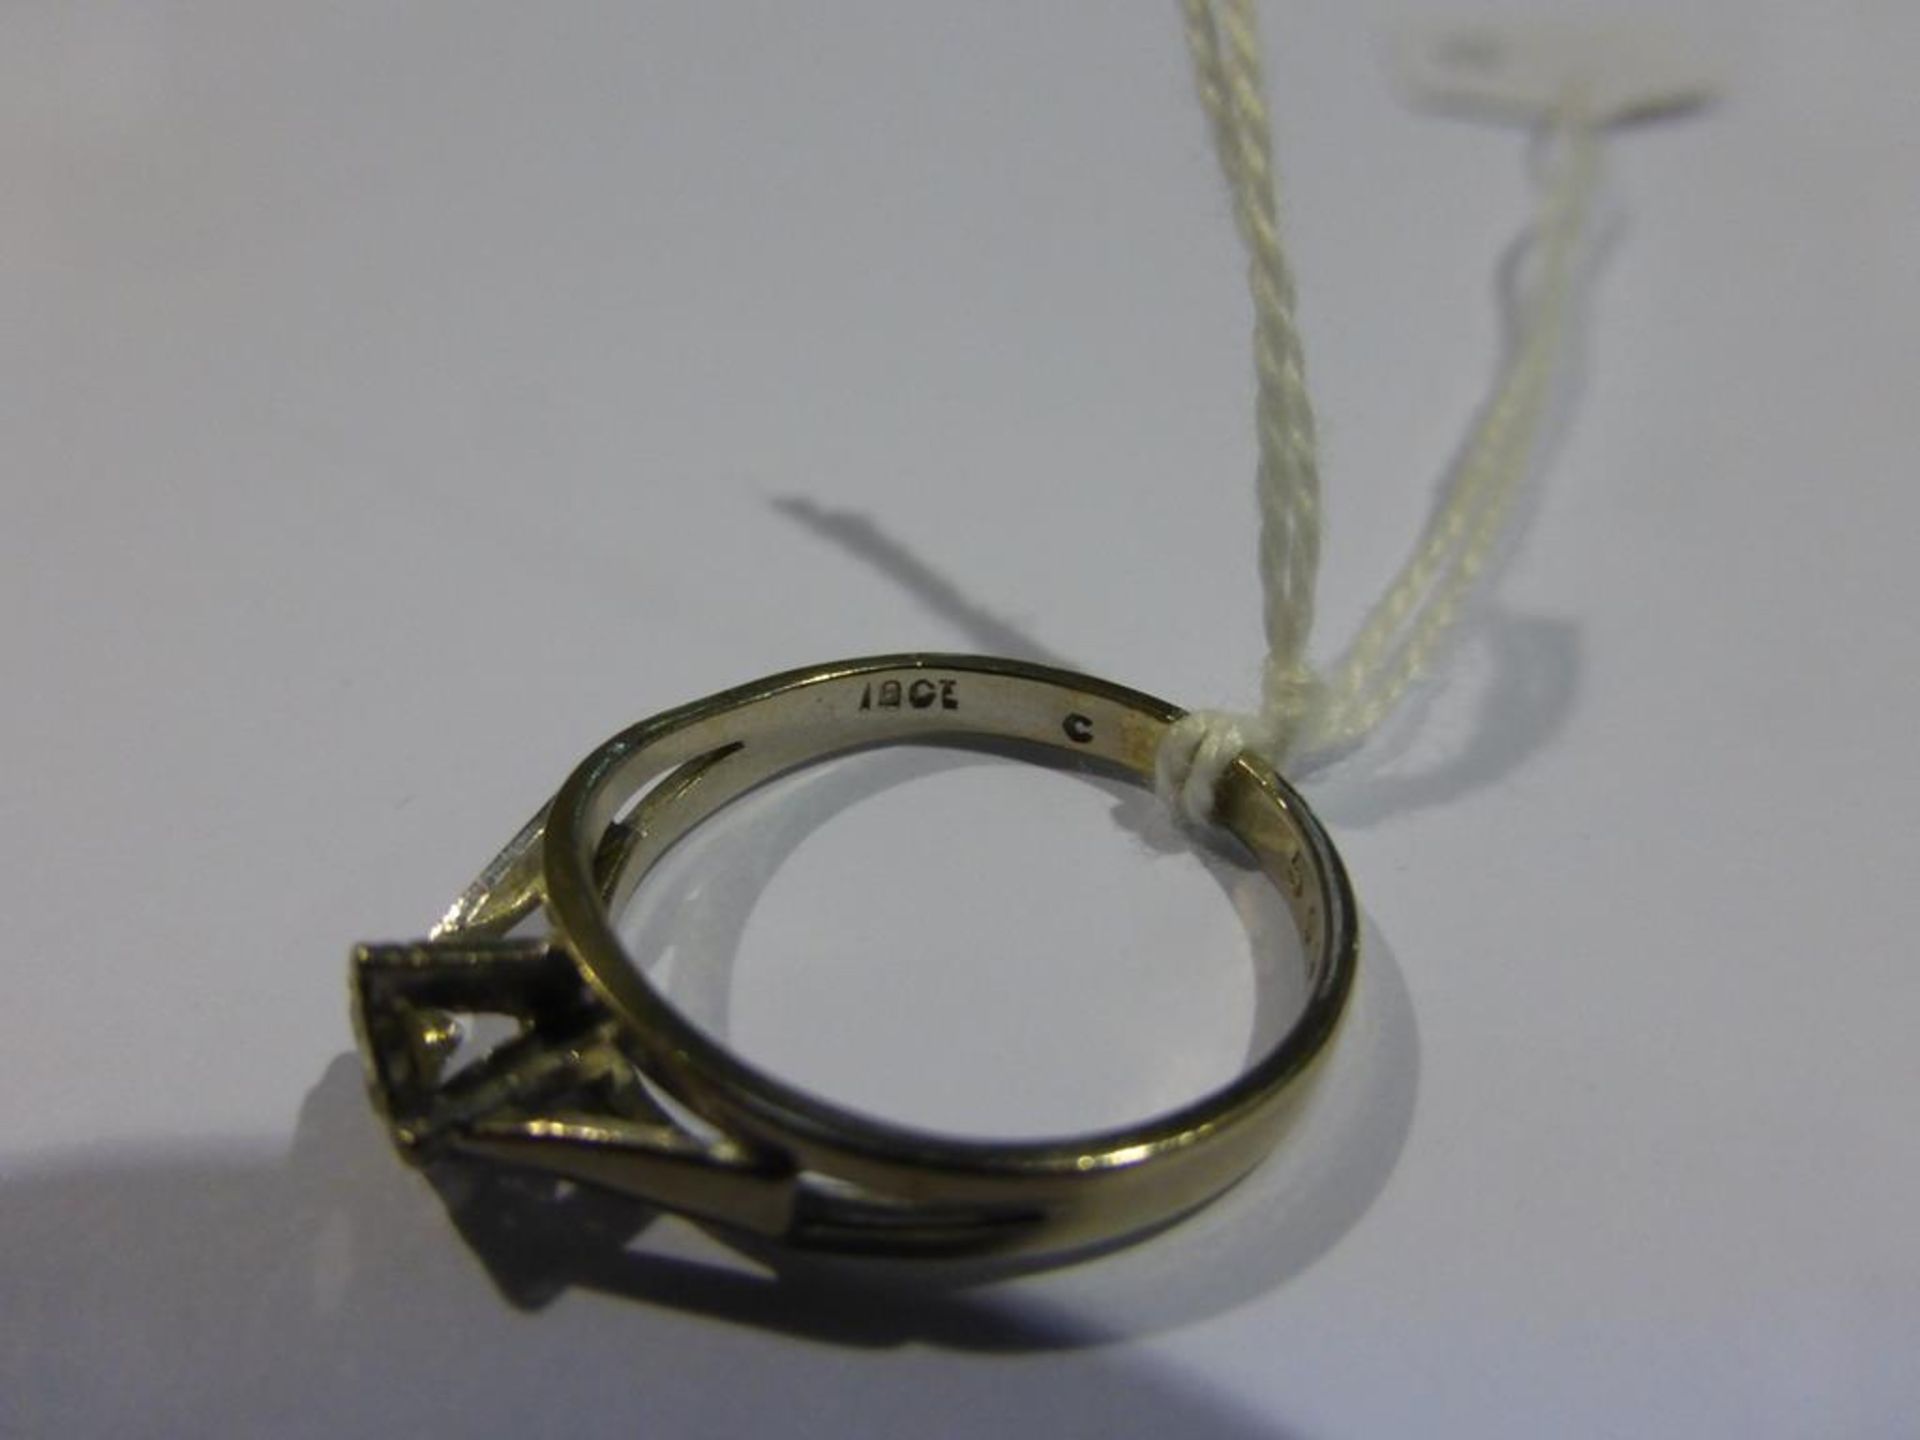 An 18ct White Gold Solitare Diamond Ring - Image 2 of 3